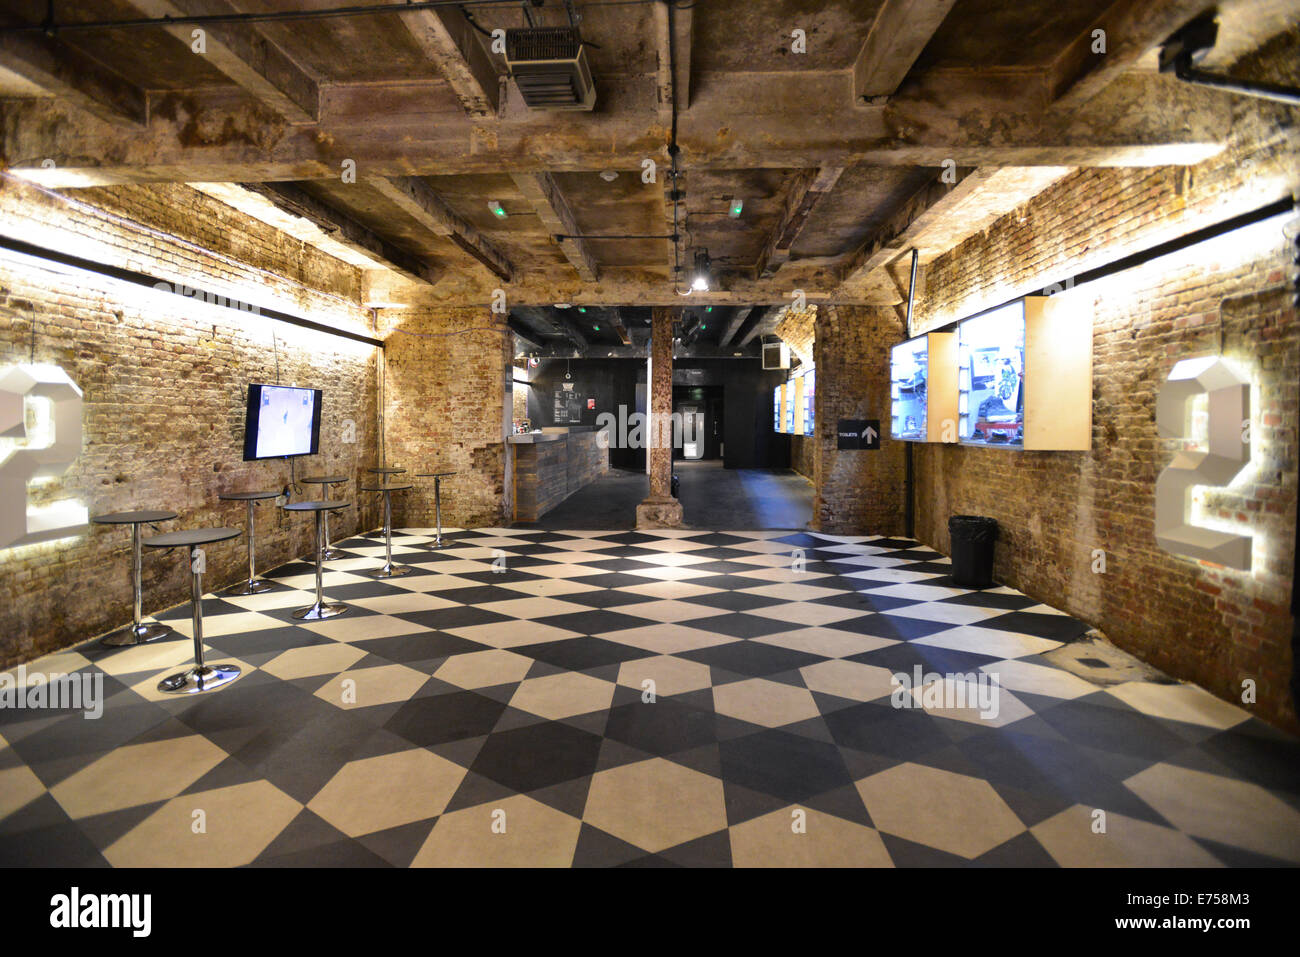 Waterloo Station, London, UK. 7th September 2014. House of Vans, a 3000 square meter space built in the Old Vic Tunnels at Waterloo, with a music venue, art gallery, artists studios, cafe, cinema, bar, and the skatepark. Credit:  Matthew Chattle/Alamy Live News Stock Photo